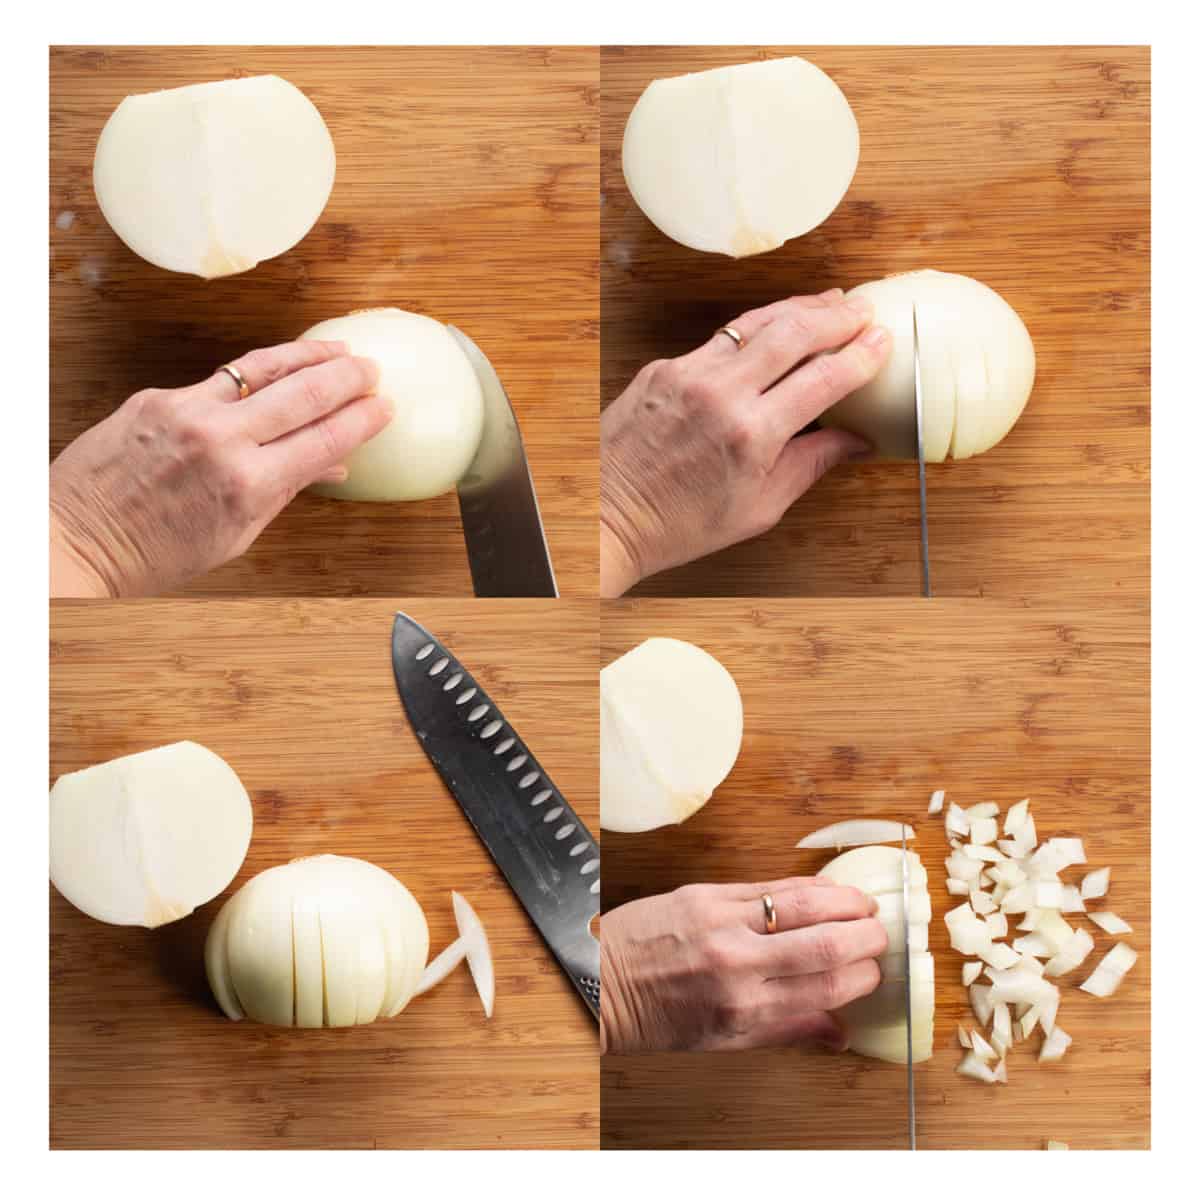 step by step showing how to dice an onion.